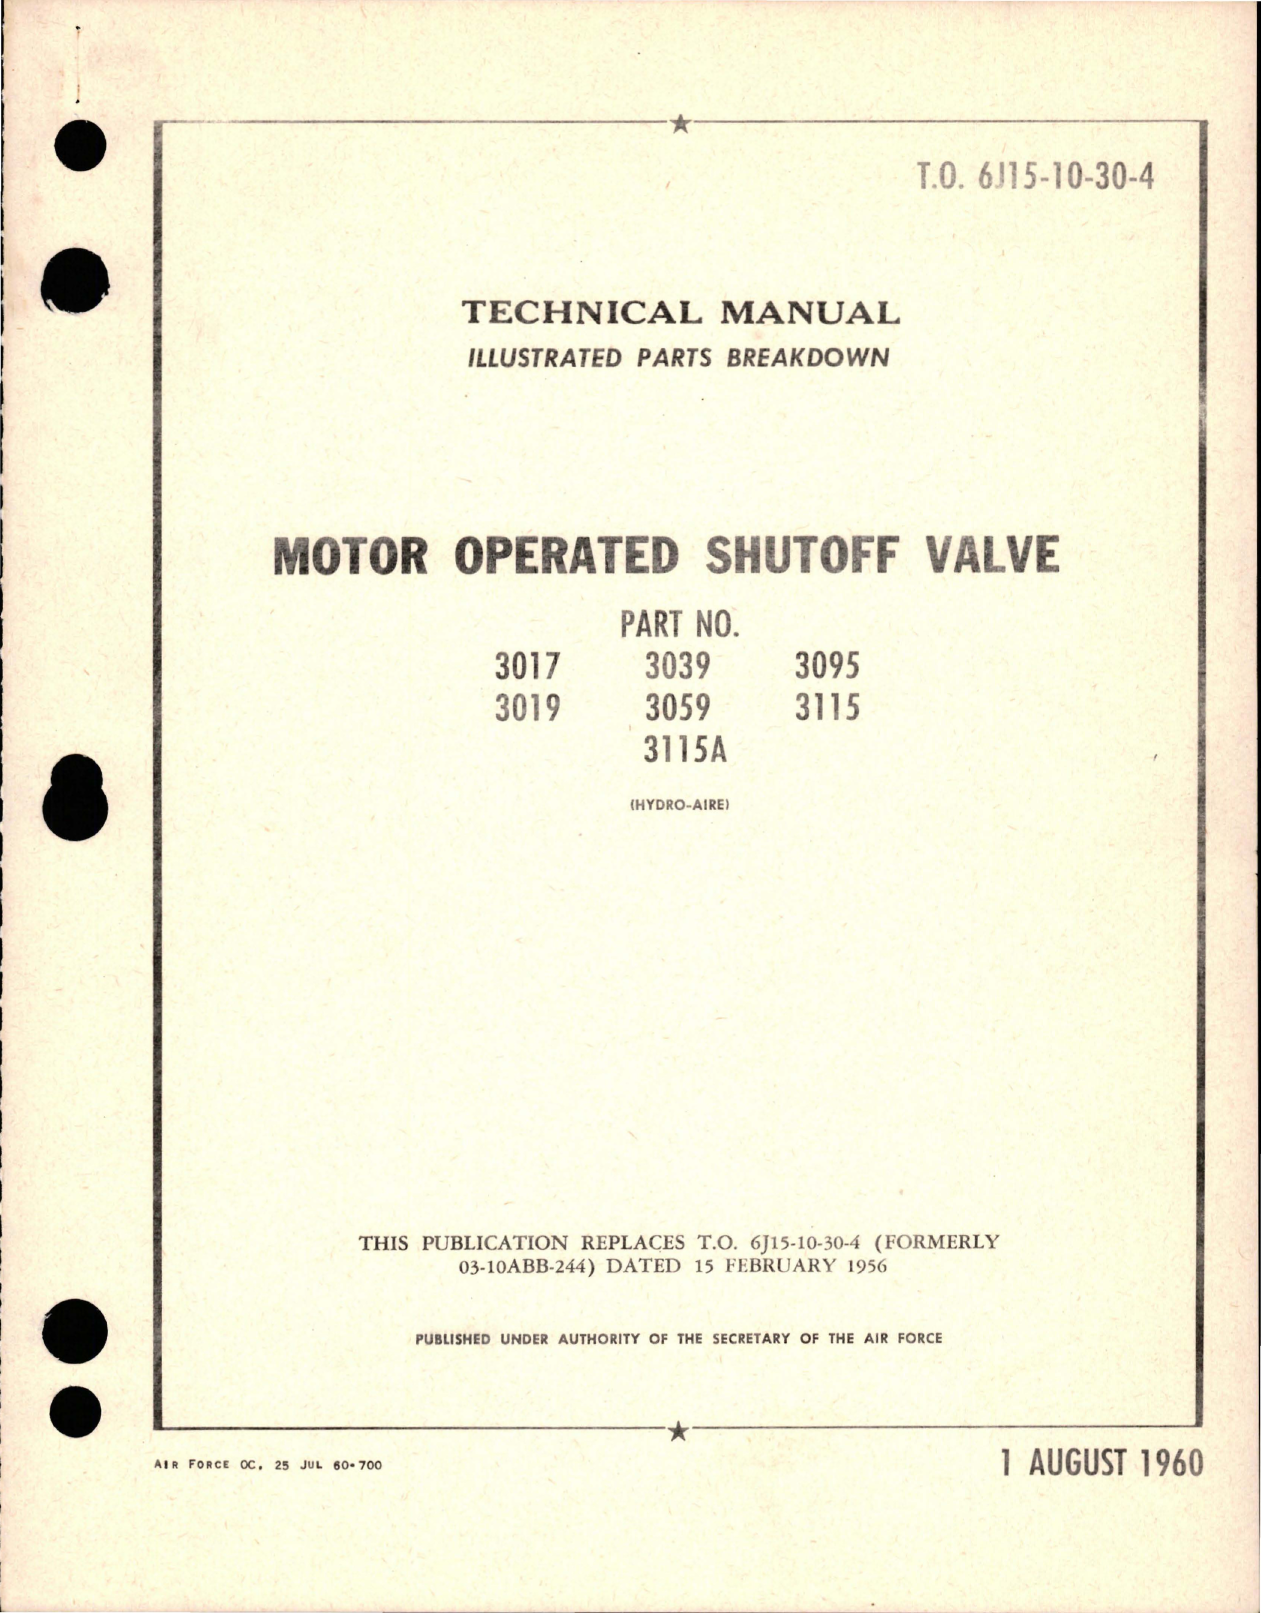 Sample page 1 from AirCorps Library document: Illustrated Parts Breakdown for Motor Operated Shutoff Valve